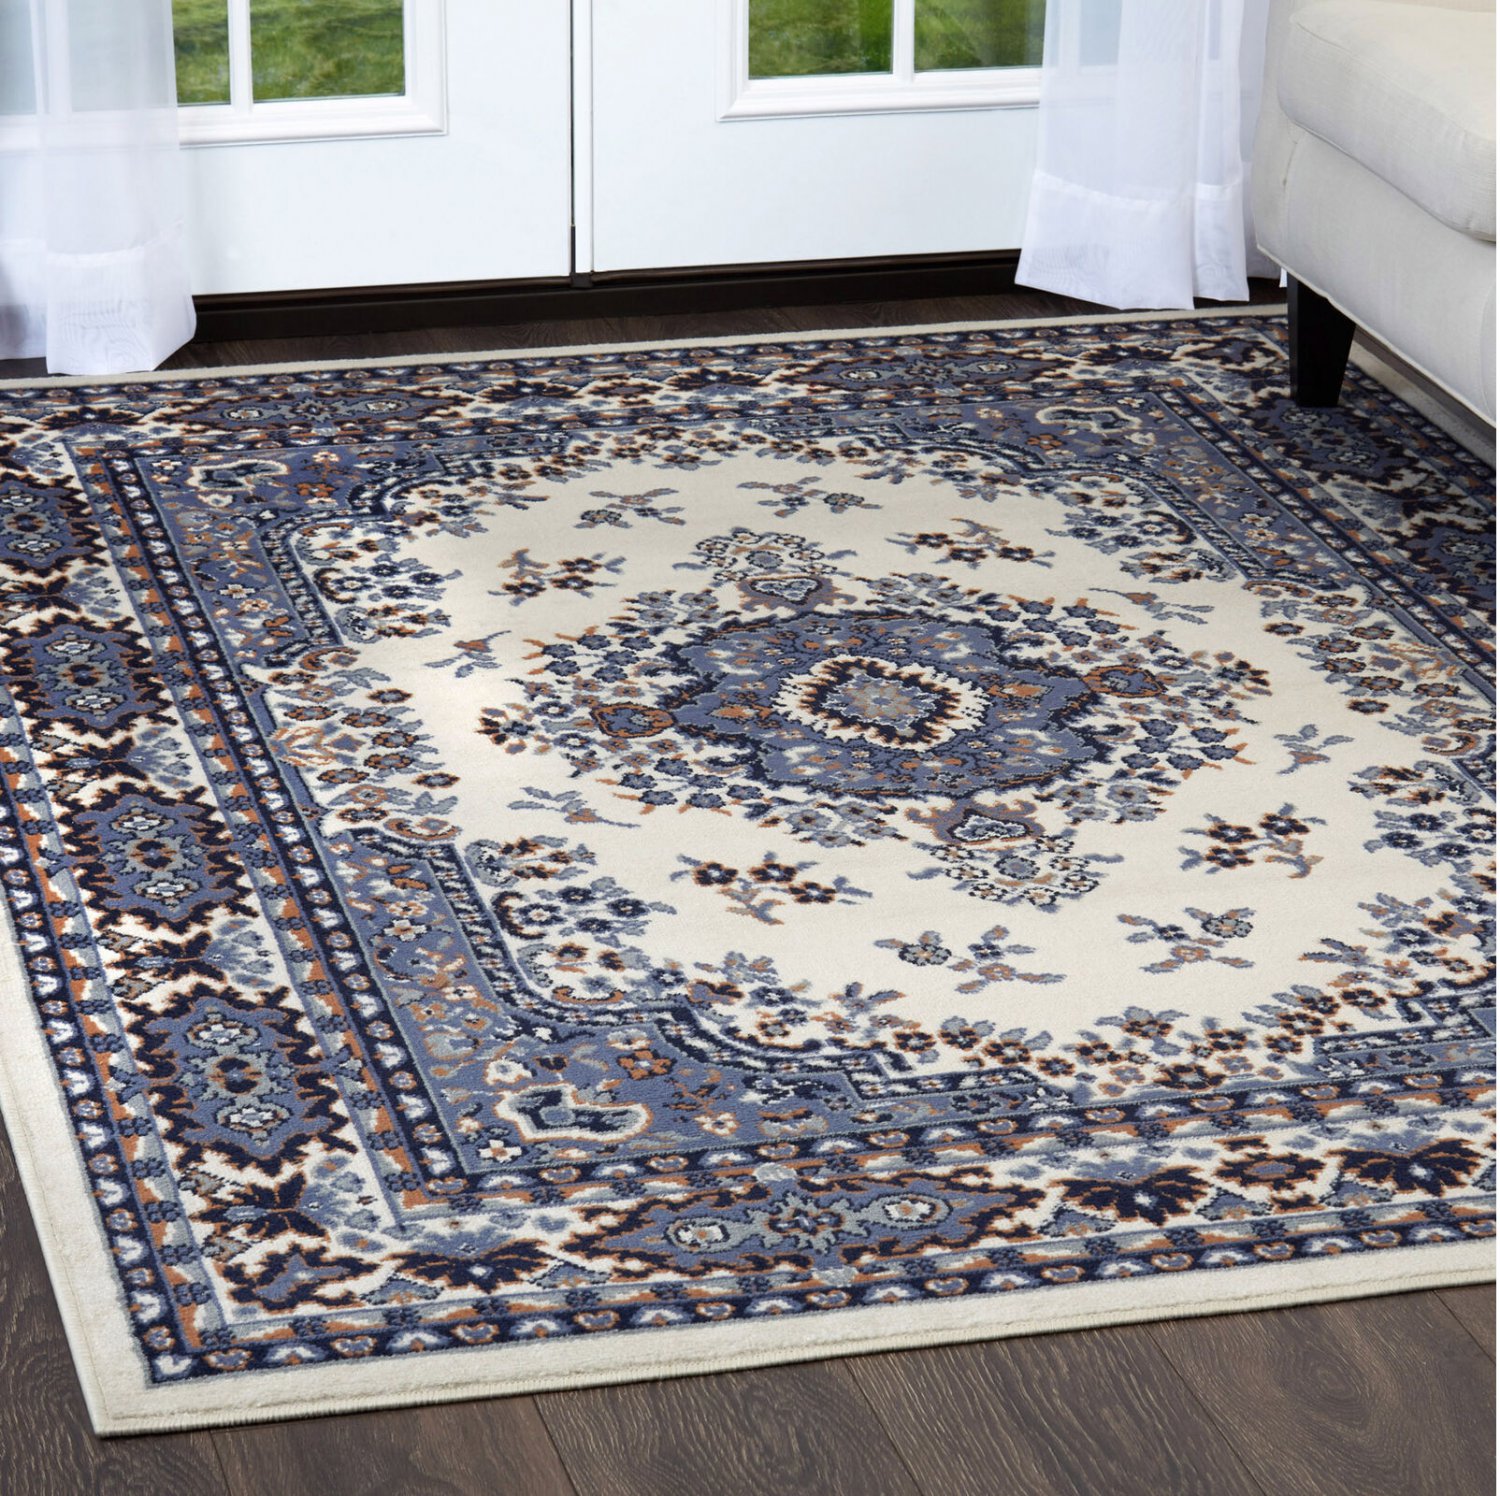 NEW AREA RUG CLEARANCE FREE SHIPPING TO YOUR DOOR